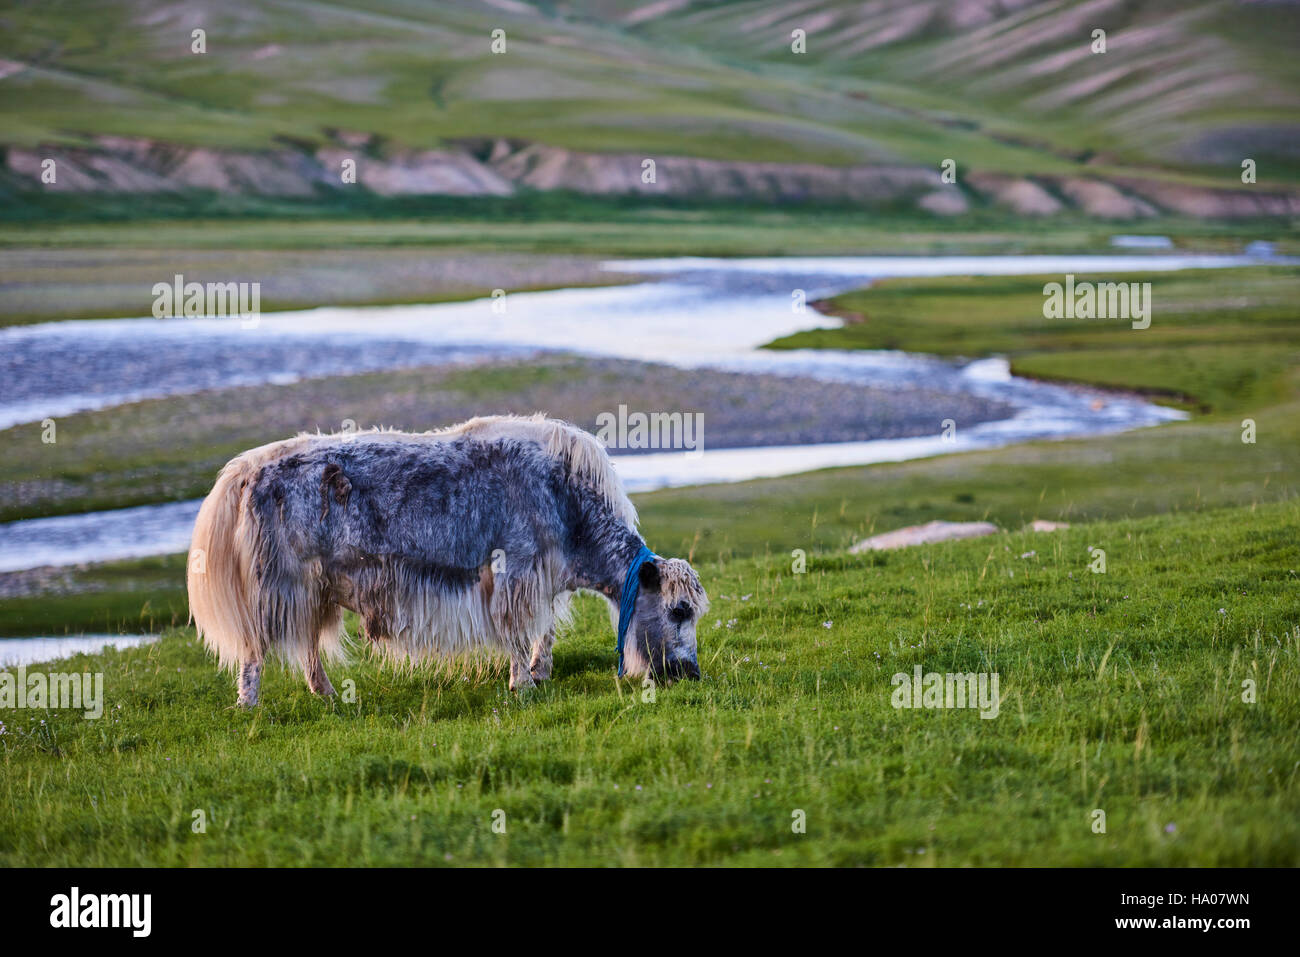 Mongolia, Bayankhongor province, an yak in the steppe Stock Photo